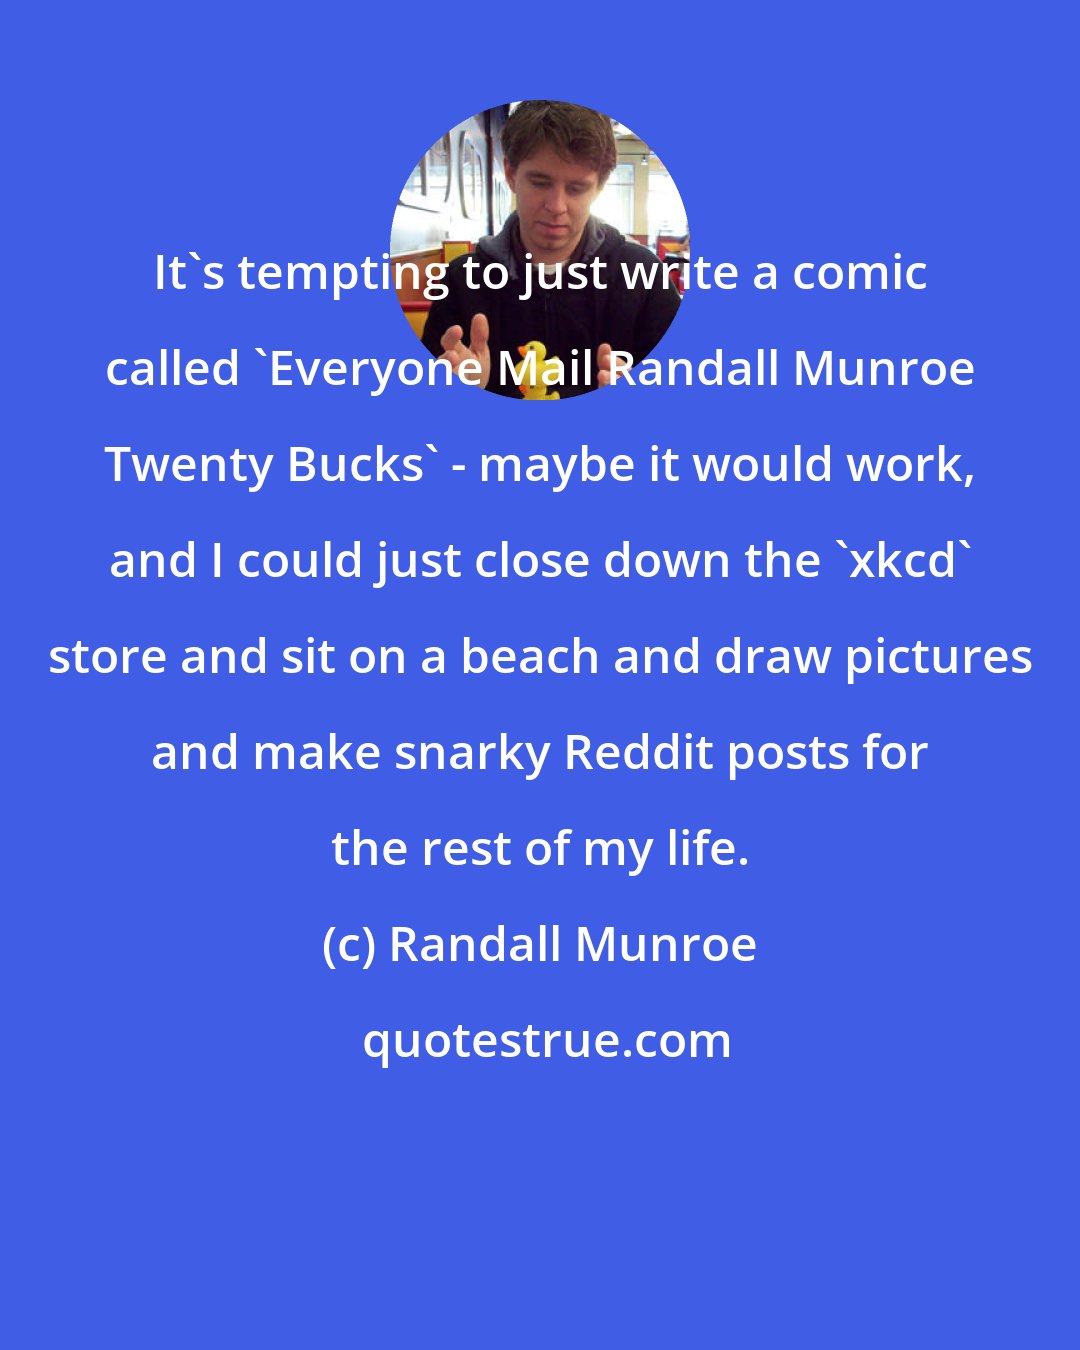 Randall Munroe: It's tempting to just write a comic called 'Everyone Mail Randall Munroe Twenty Bucks' - maybe it would work, and I could just close down the 'xkcd' store and sit on a beach and draw pictures and make snarky Reddit posts for the rest of my life.